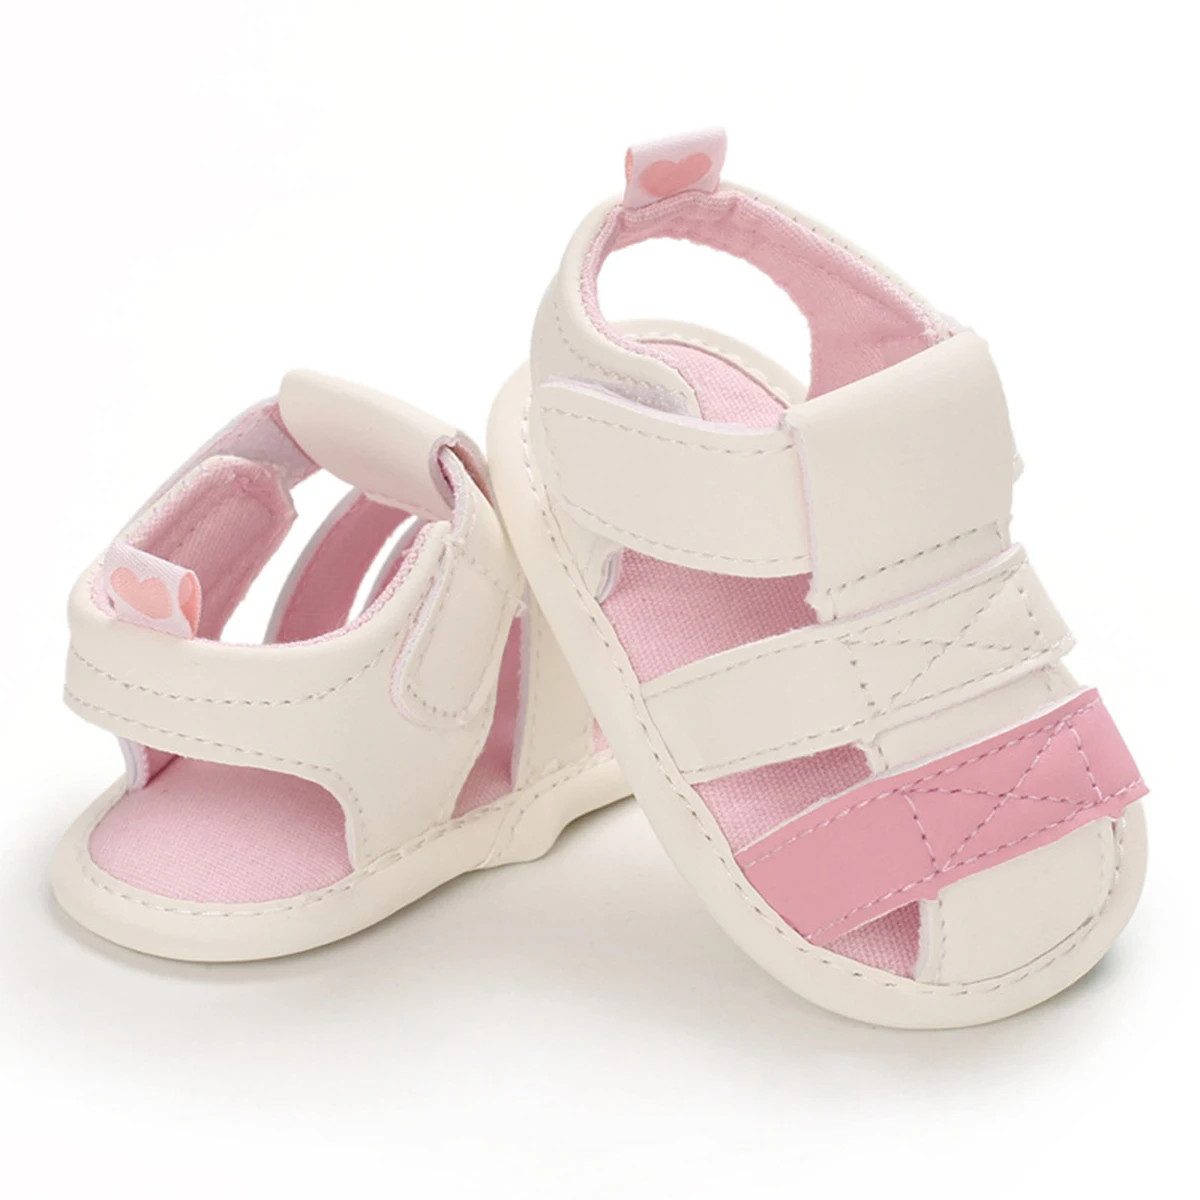 

Summer Infant Baby Girl Boy Kids Sandals Crib Shoes Soft Sole Solid Hook Causal Cute Shoes 0-18M 2020 Newest Trendy